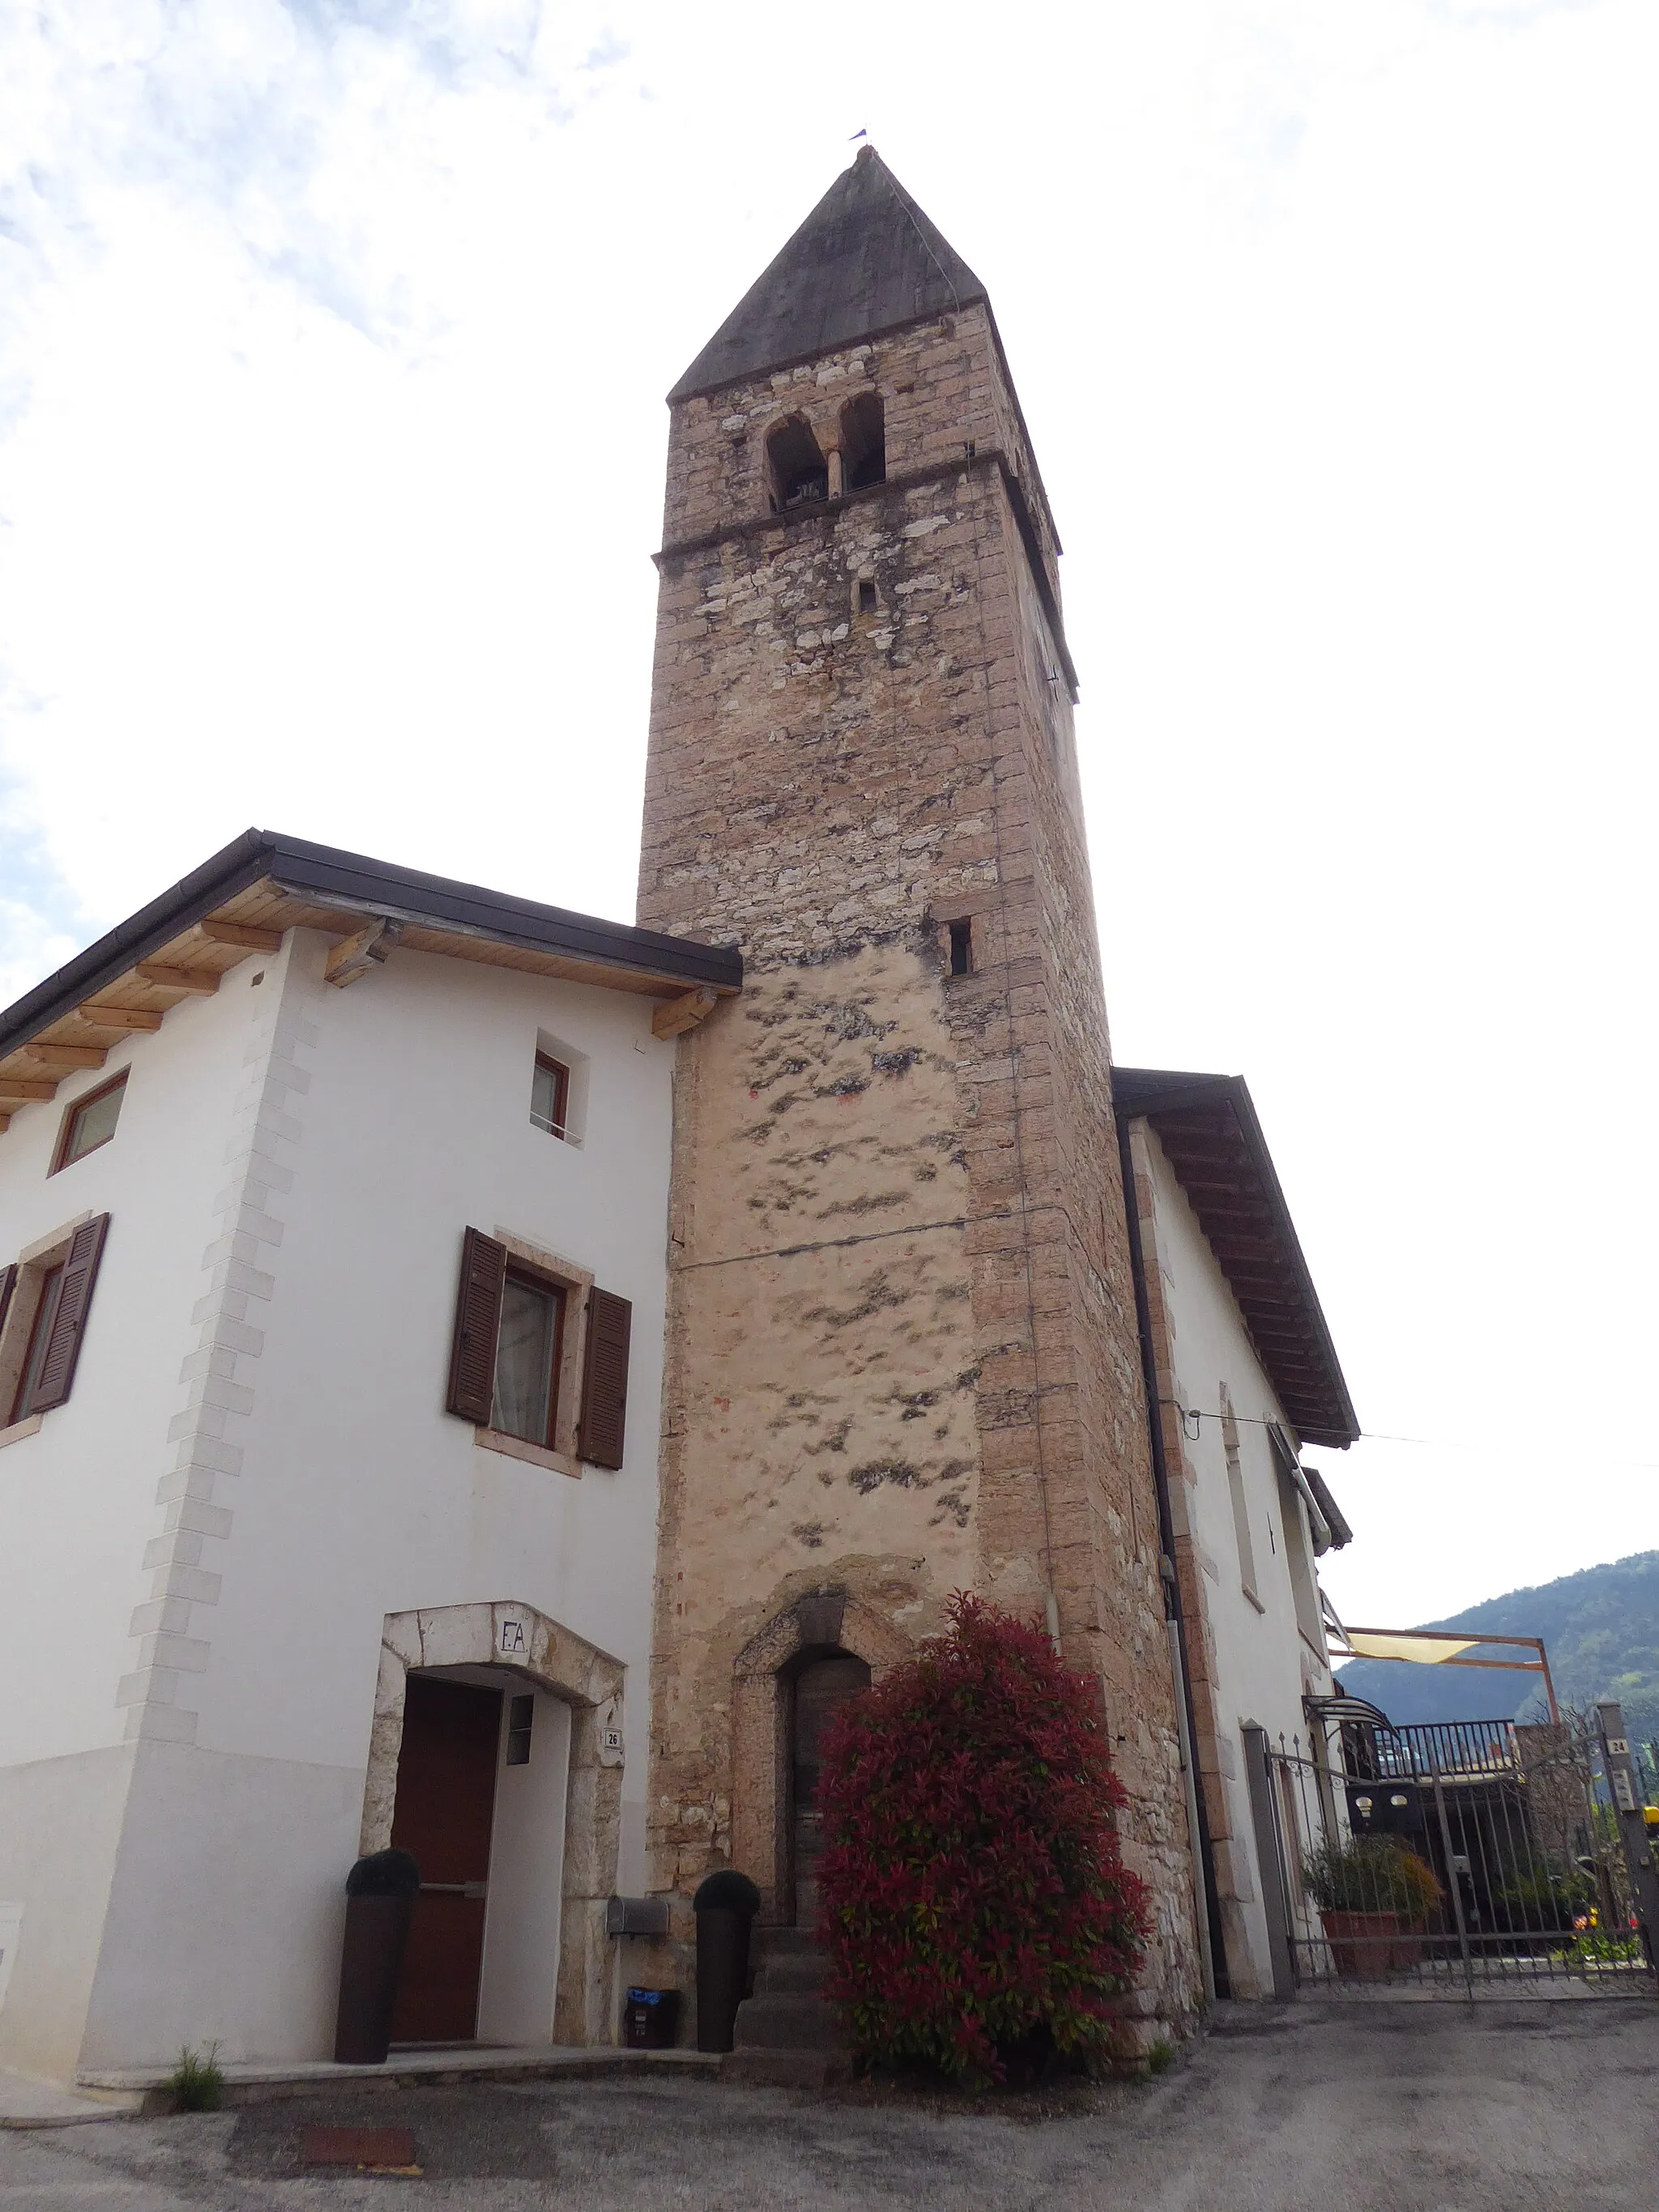 Photo showing: Cadine (Trento, Italy) - The belltower with the former Saint Helen church (now a house)